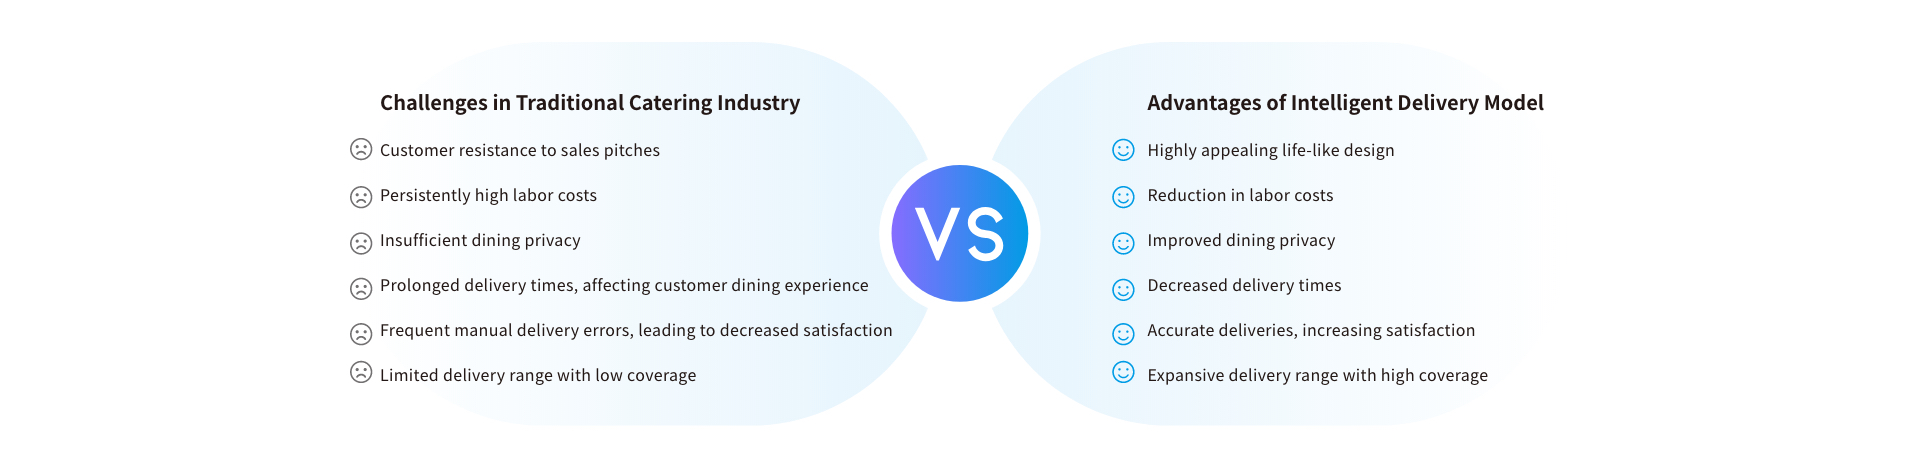 Challenges in Traditional Catering Industry VS Advantages of lntelligent Delivery Model